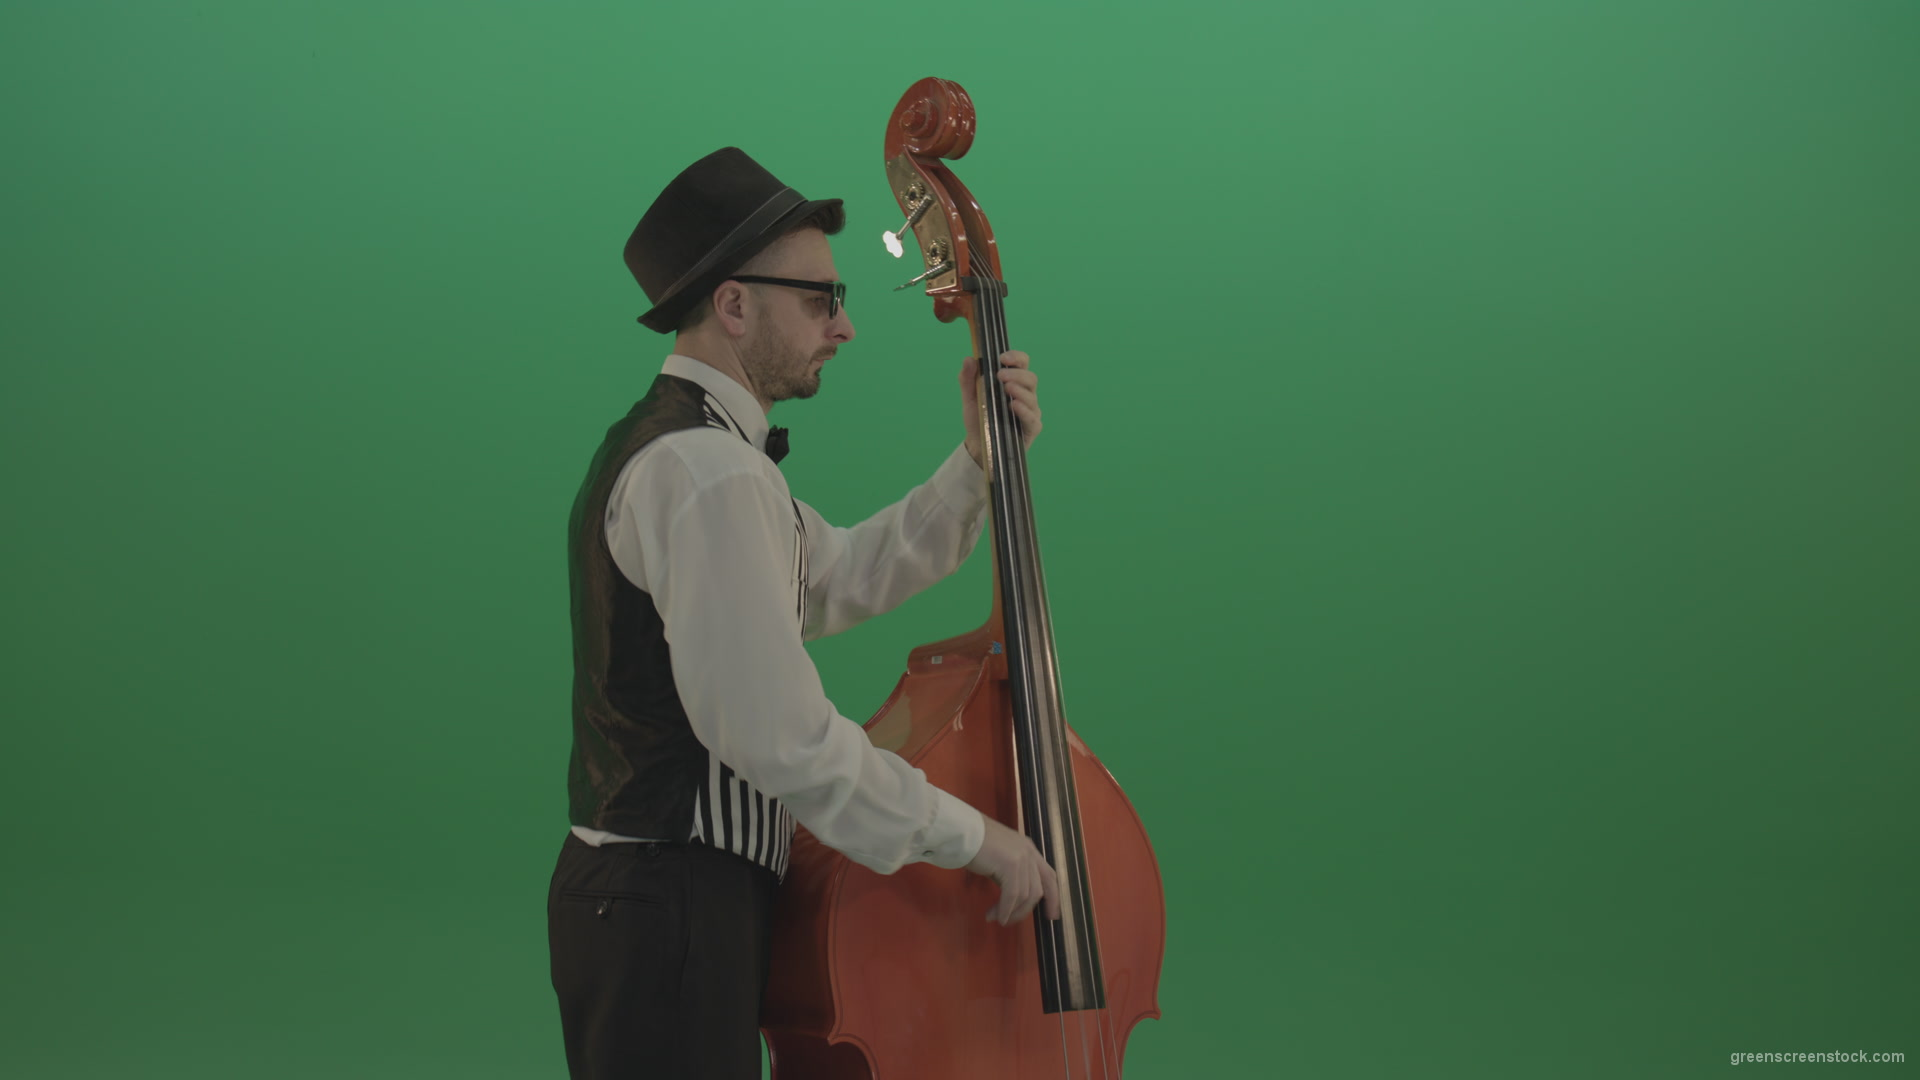 Young-Man-play-jazz-on-double-bass-String-music-instrument-isolated-on-green-screen-in-back-side-view_004 Green Screen Stock